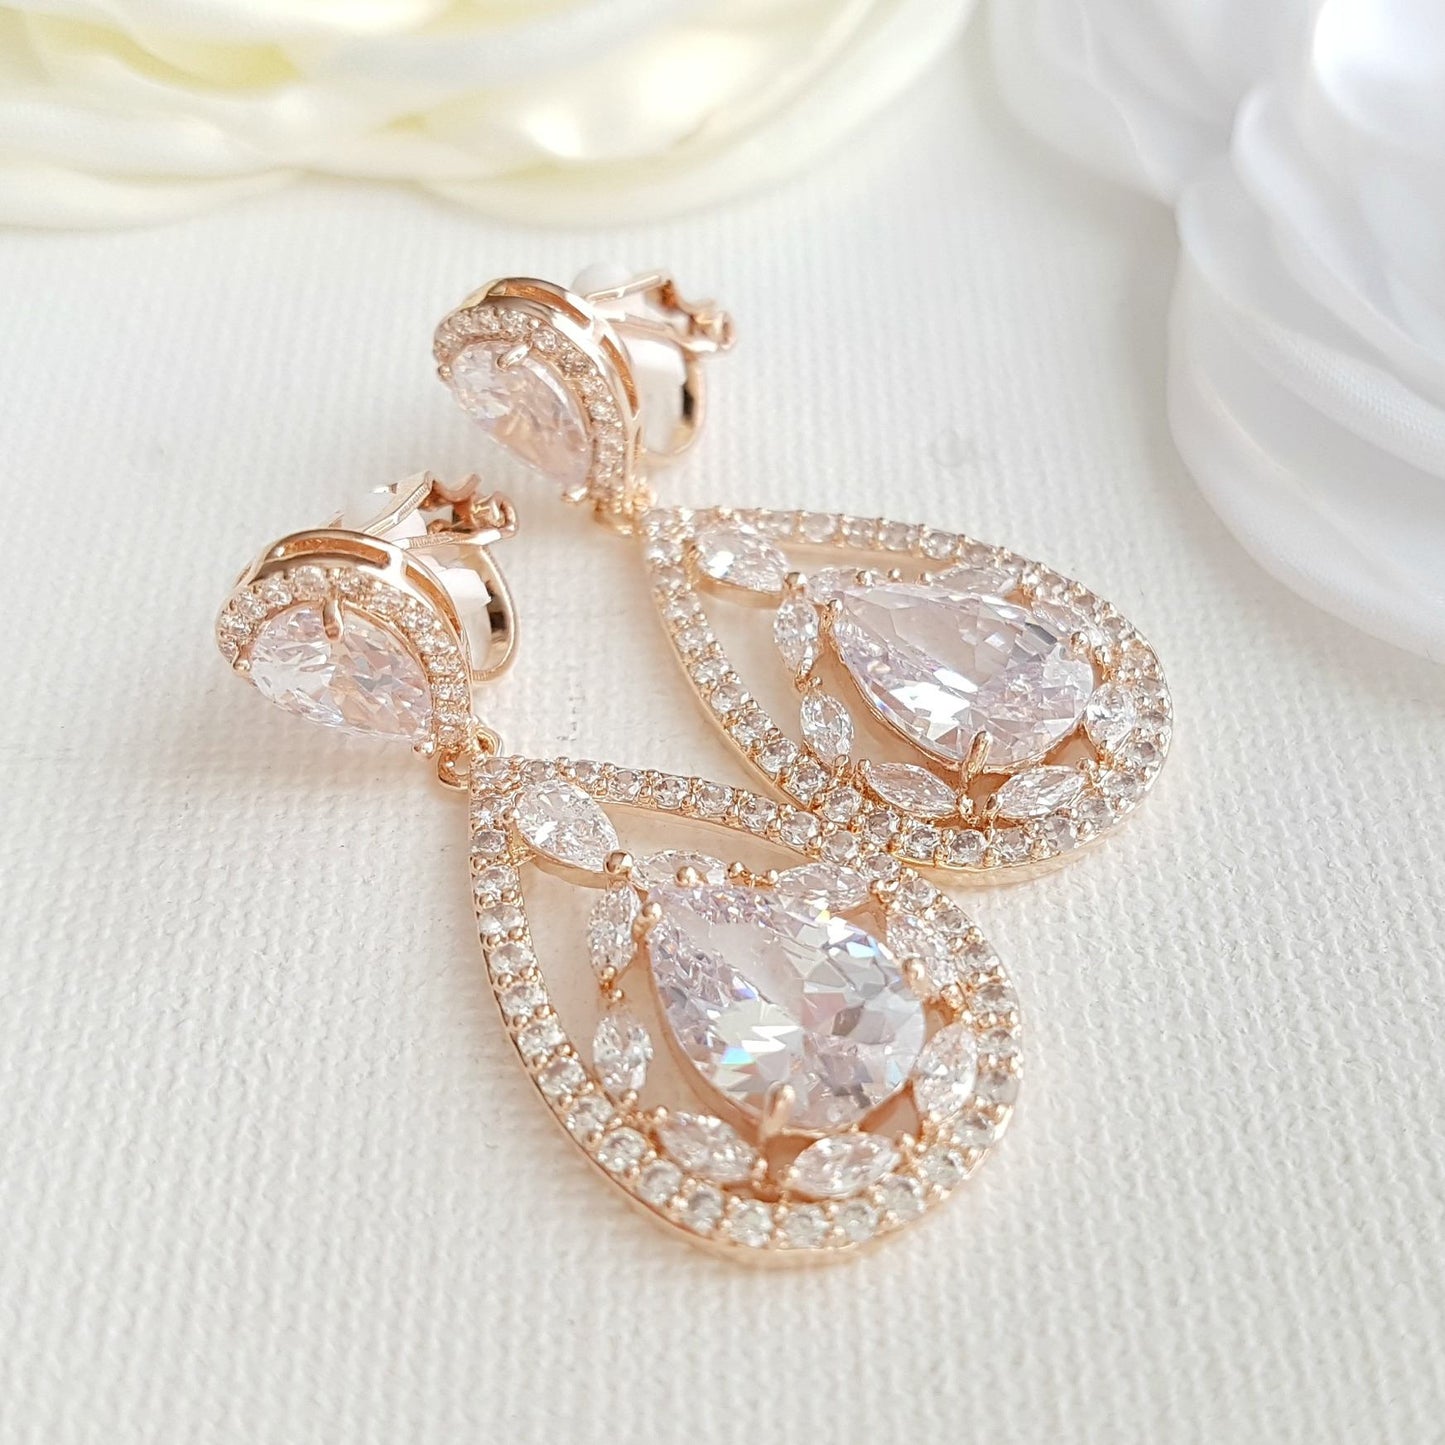 Rose Gold Clip On Earrings for Brides with Non Pierced Ears-Esther - PoetryDesigns